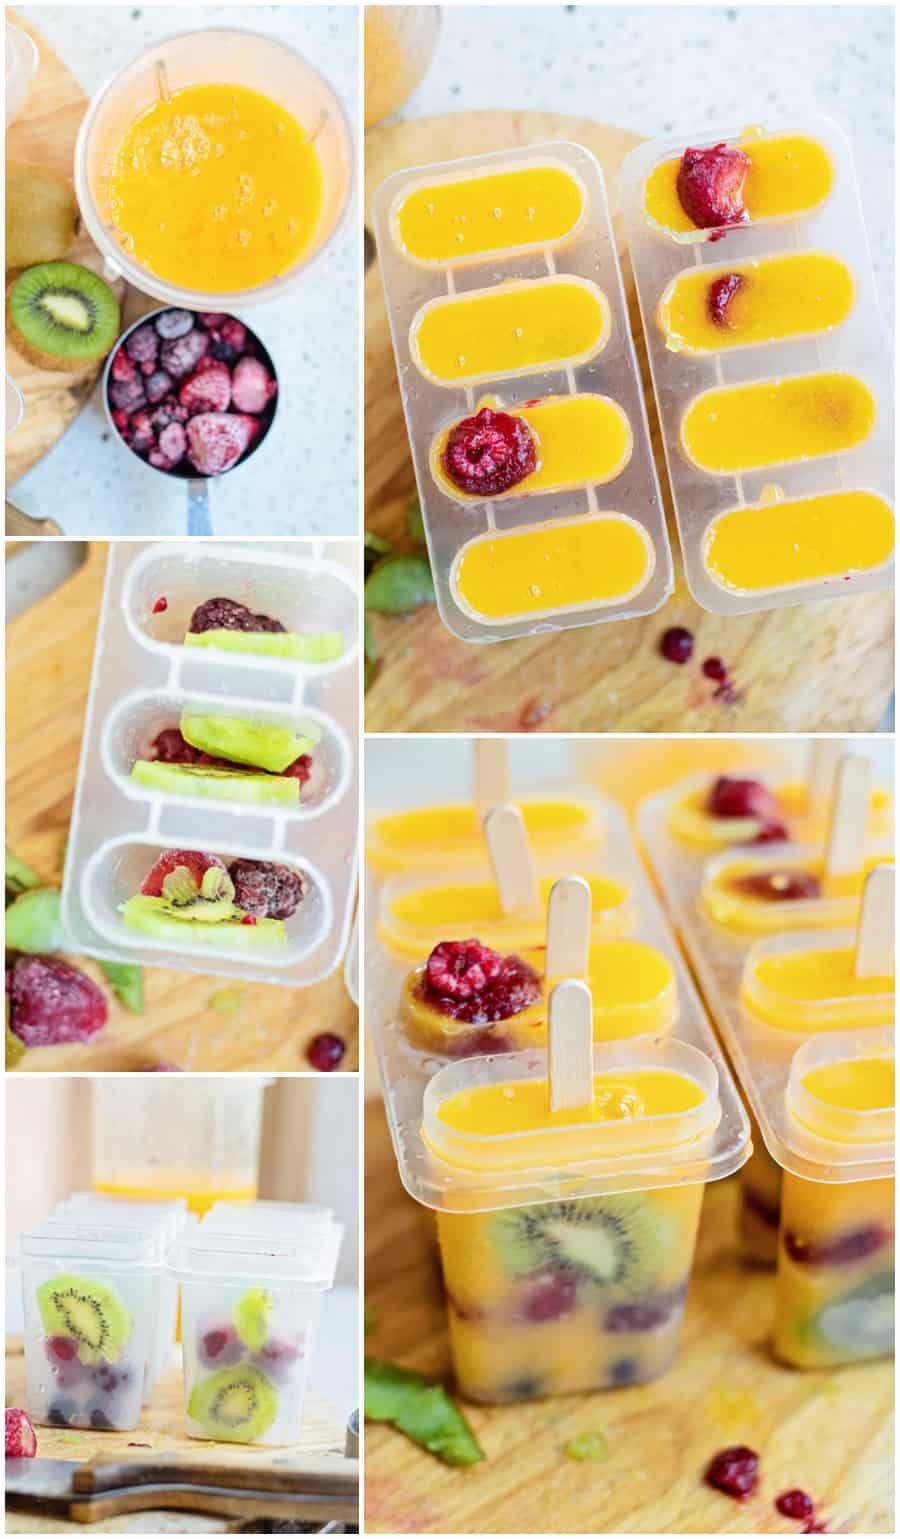 mango popsicles inside a popsicle mold with frozen kiwi and berries